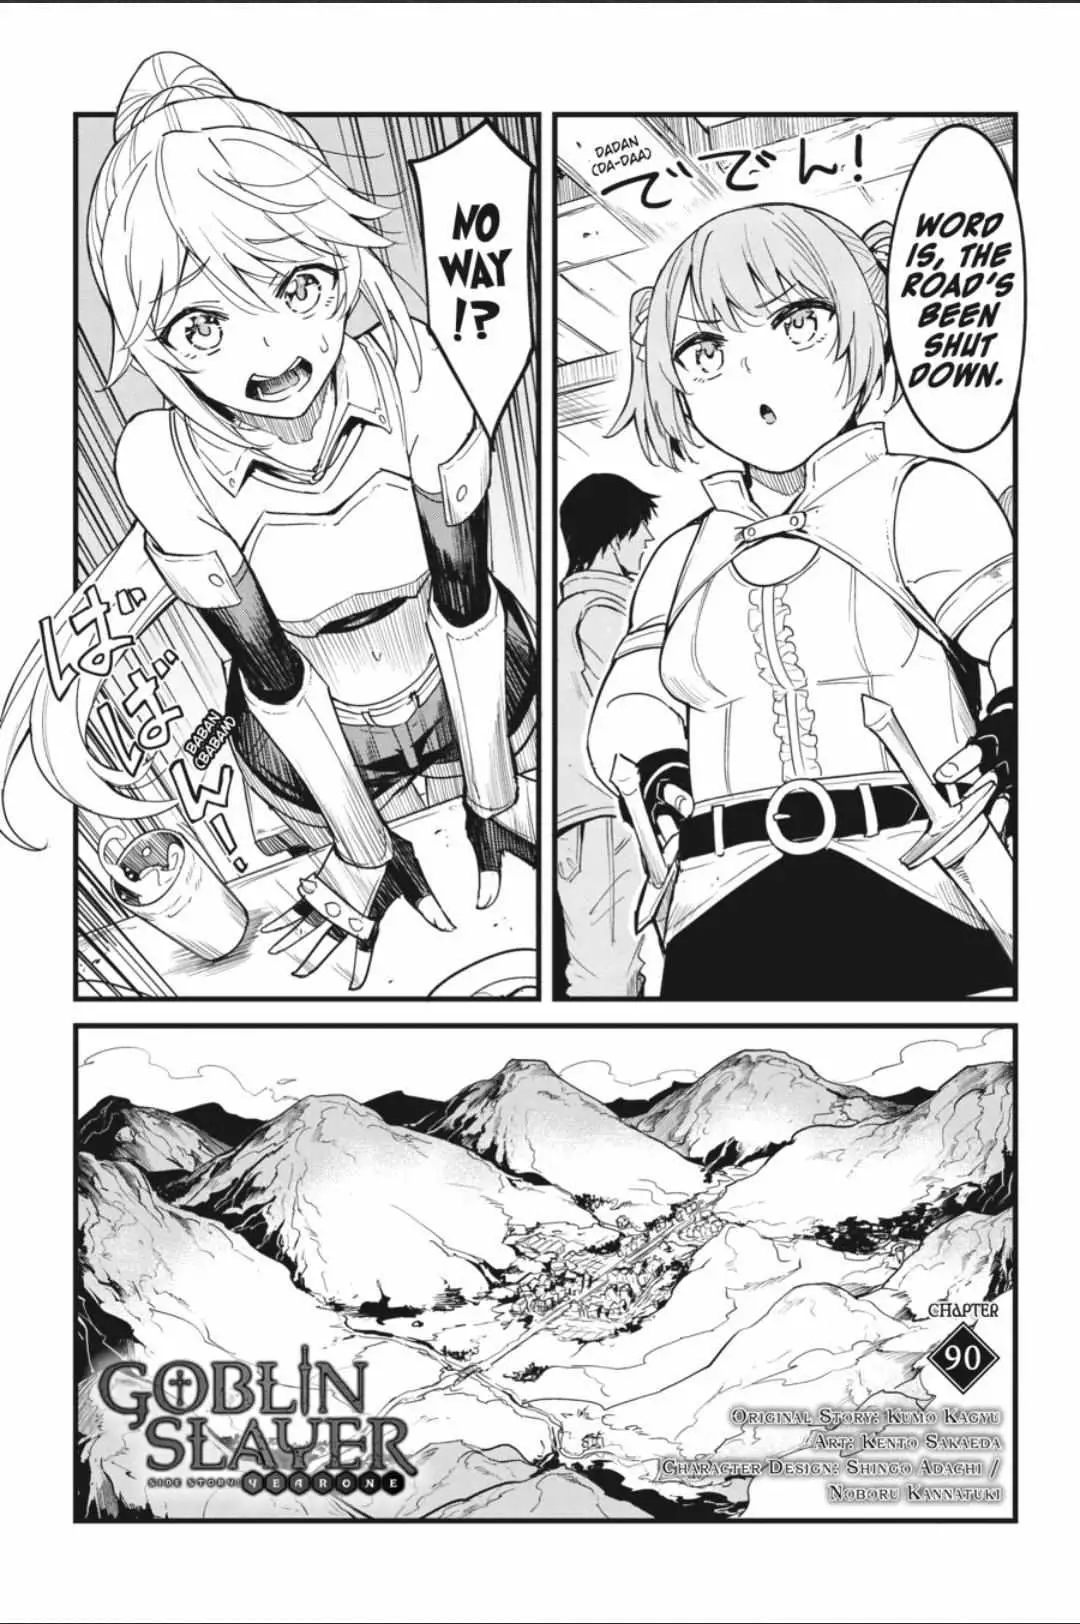 Goblin Slayer: Side Story Year One - 90 page 3-02c5166e